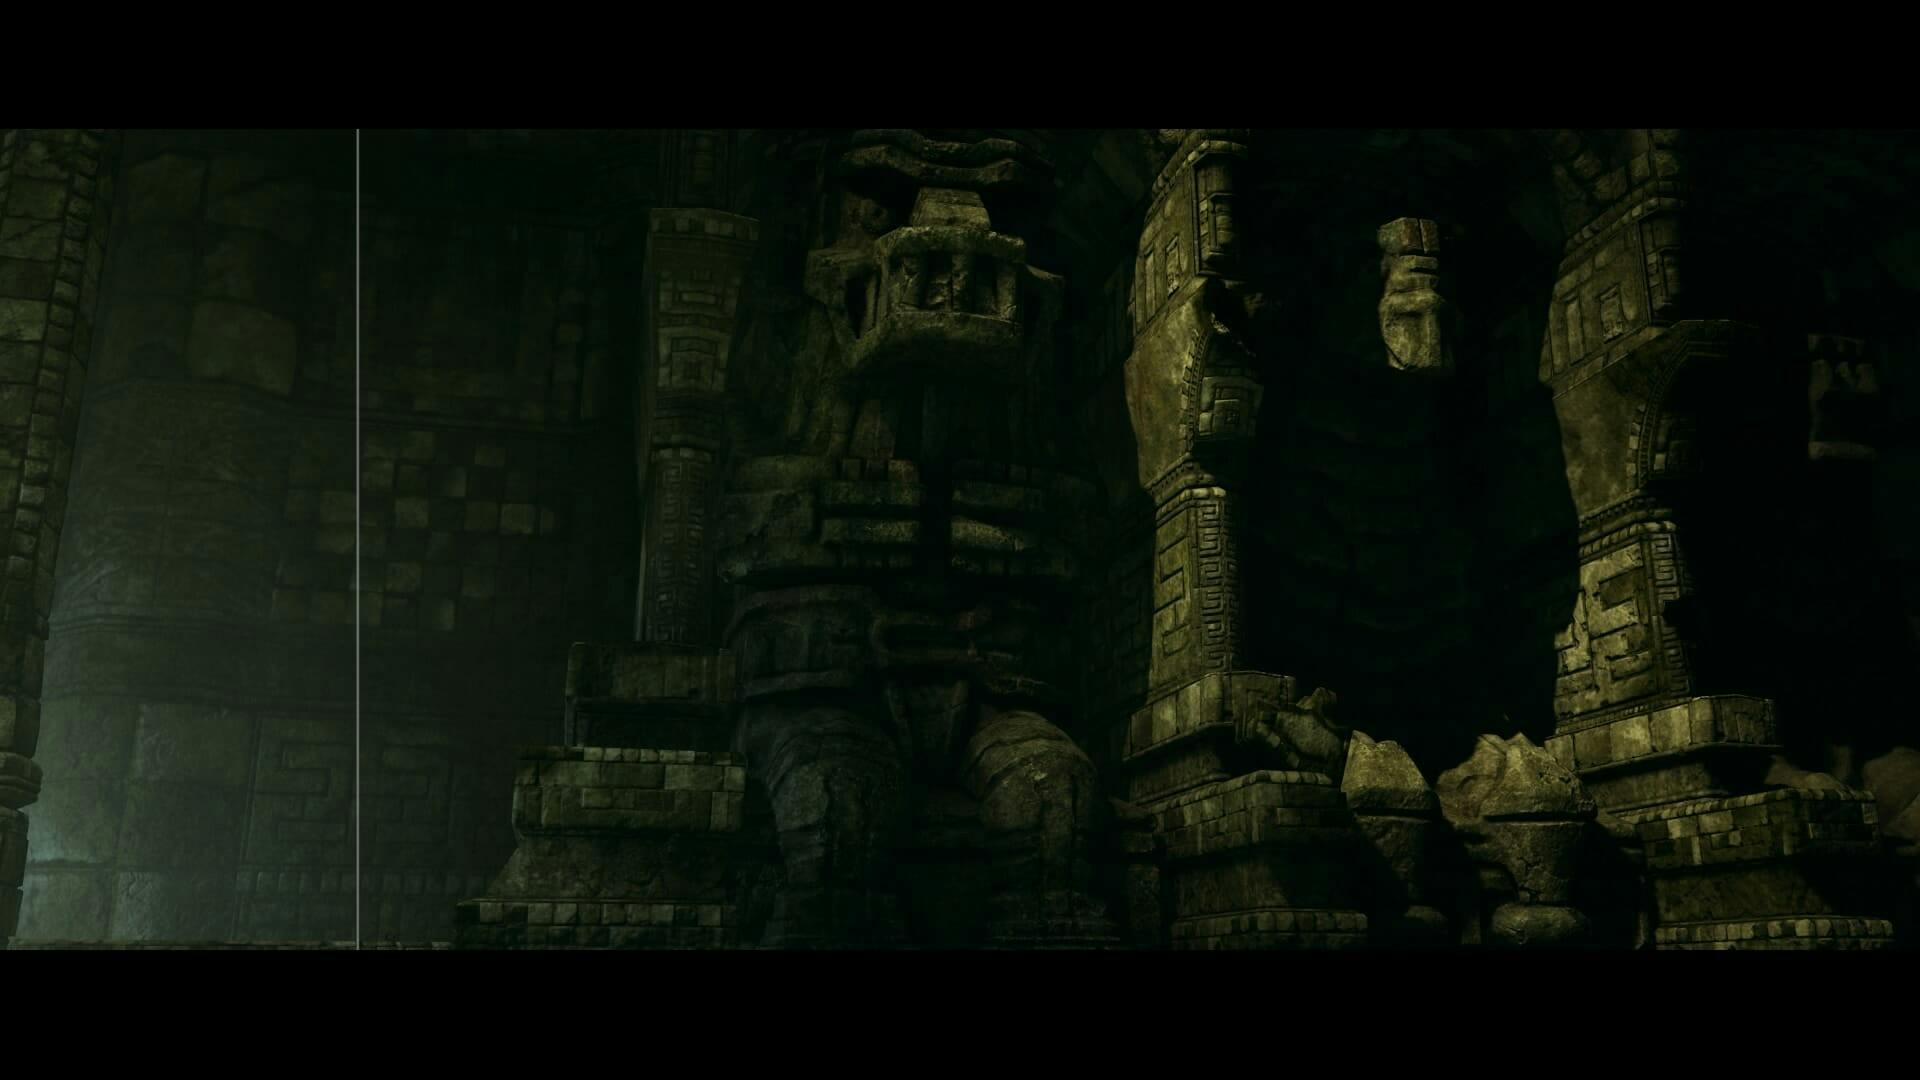 What inspired Shadow of the colossus architecture? : r